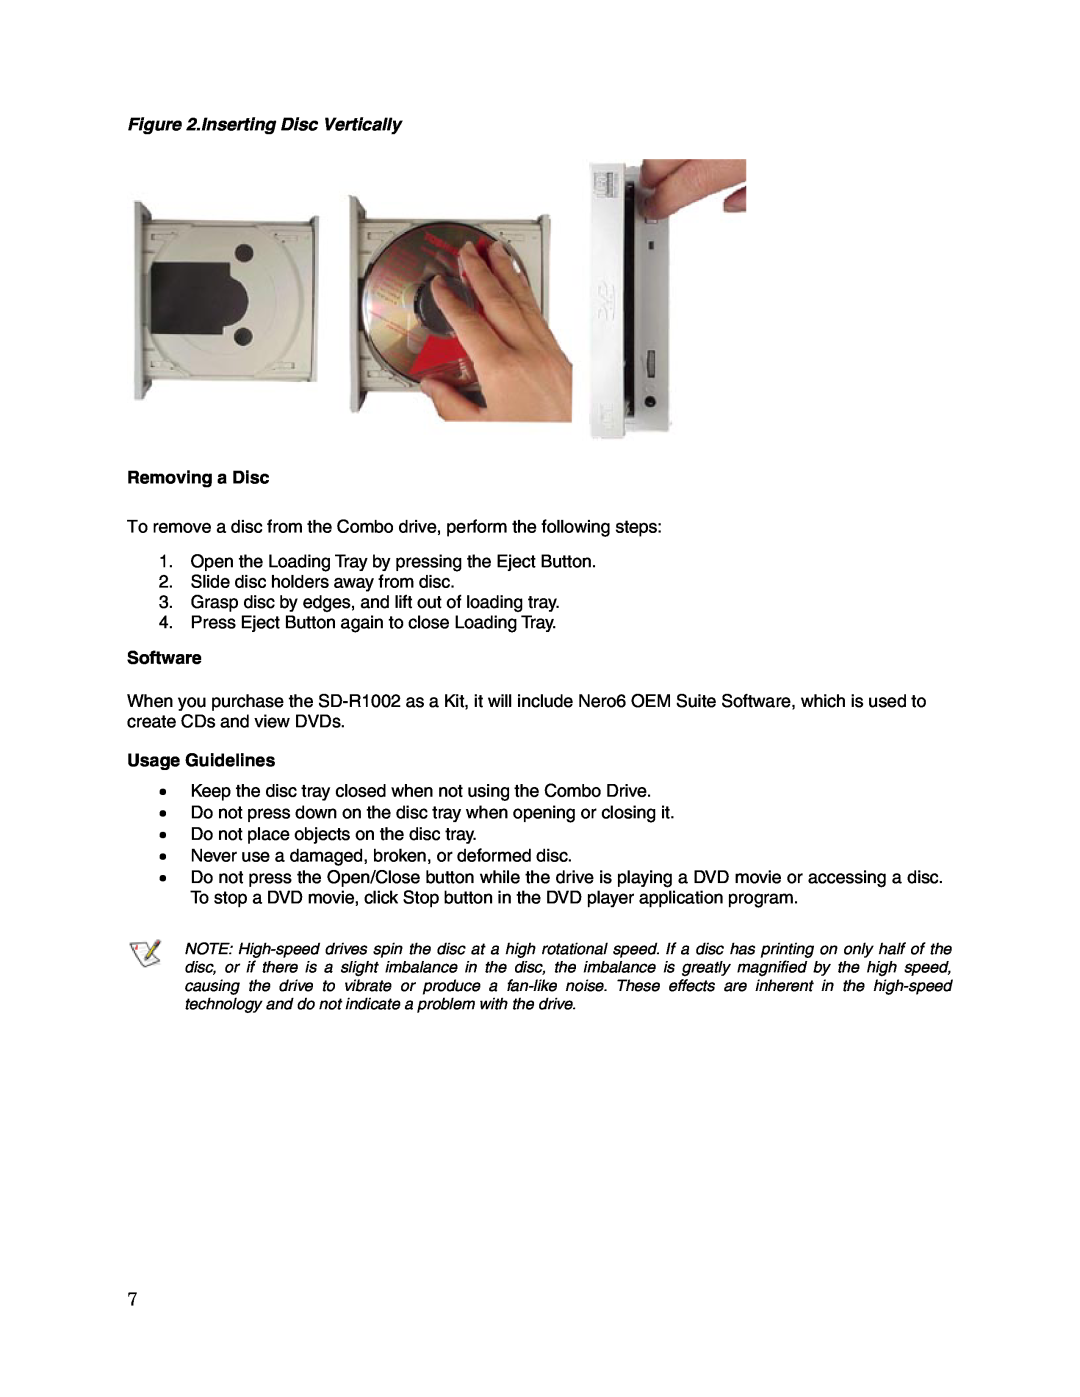 Toshiba SD-R1002 user manual Inserting Disc Vertically, Removing a Disc, Software, Usage Guidelines 